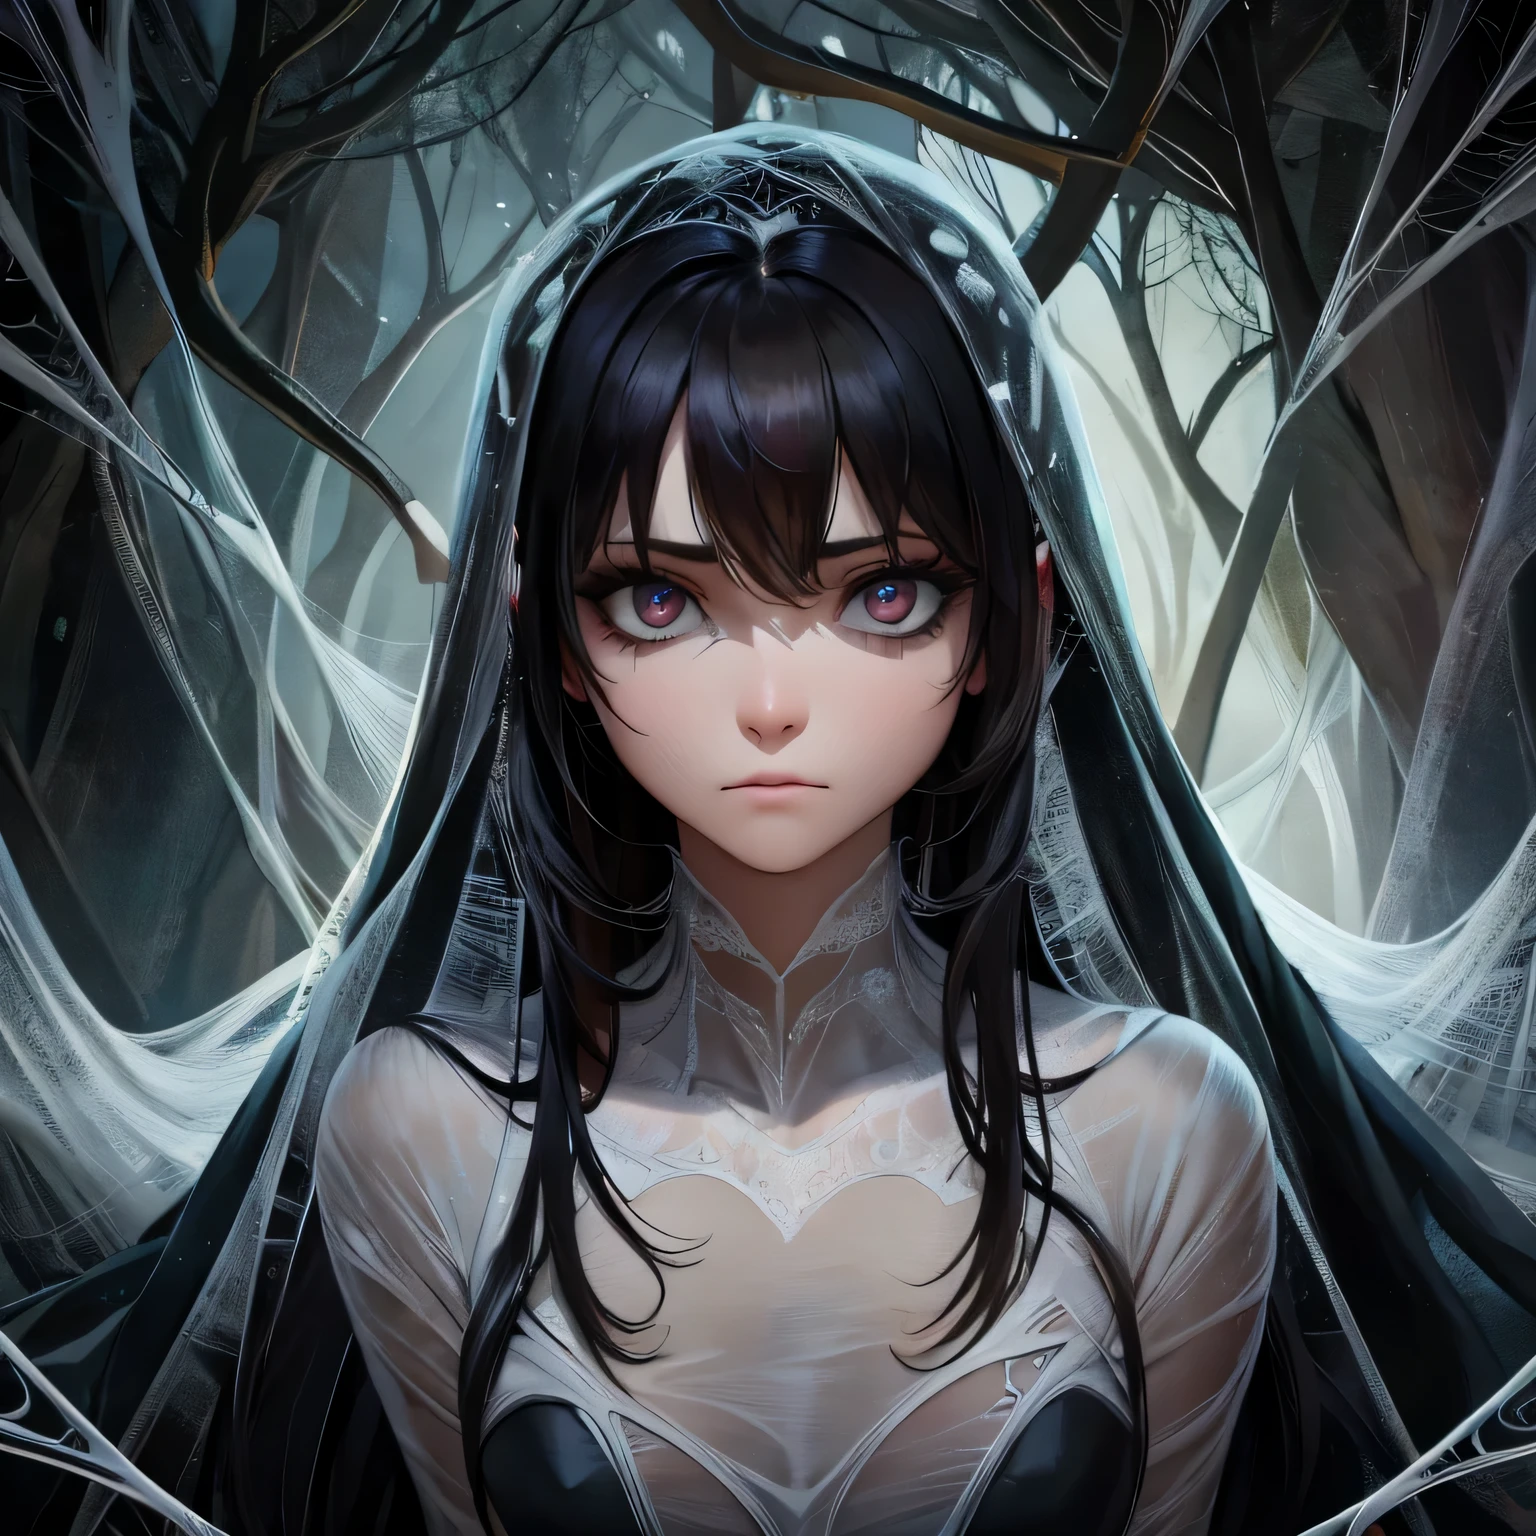 (best quality,4k,highres,masterpiece:1.2),dark gothic,hauntingly detailed,spider web,woman in distress,detailed facial expression,dark eyes,long flowing hair,captivatingly desperate gaze,wisps of cobweb tangled in her hair,dramatic lighting,imprisoned by the silken threads,cocooned in despair,detailed shadows and highlights,dark and eerie atmosphere,web strands shimmering under moonlight,lifelike texture of spider web,emphasize the complexity of the web with fine details,glimmer of hope in her eyes,contrast between light and darkness,velvet-like backdrop,constantly changing lighting effects,subtle hints of fear in her expression,dimly illuminated surroundings,dramatic close-up of her face,dewdrops glistening on the web threads,tangled emotions portrayed through her body language,captivating portrait of vulnerability and strength,dark fantasy theme,ethereal and mysterious mood,sense of entrapment and struggle,faint echoes of distant spiders,ominous presence lurking in the shadows,subtle infusion of color hinting at the unknown,evocative and surreal composition,detailed fineness in each thread of the spider web,eye-catching attention to detail,hypnotizing and unsettling atmosphere,intense emotions conveyed through subtle nuances of expression,transcendent portrayal of the human spirit.